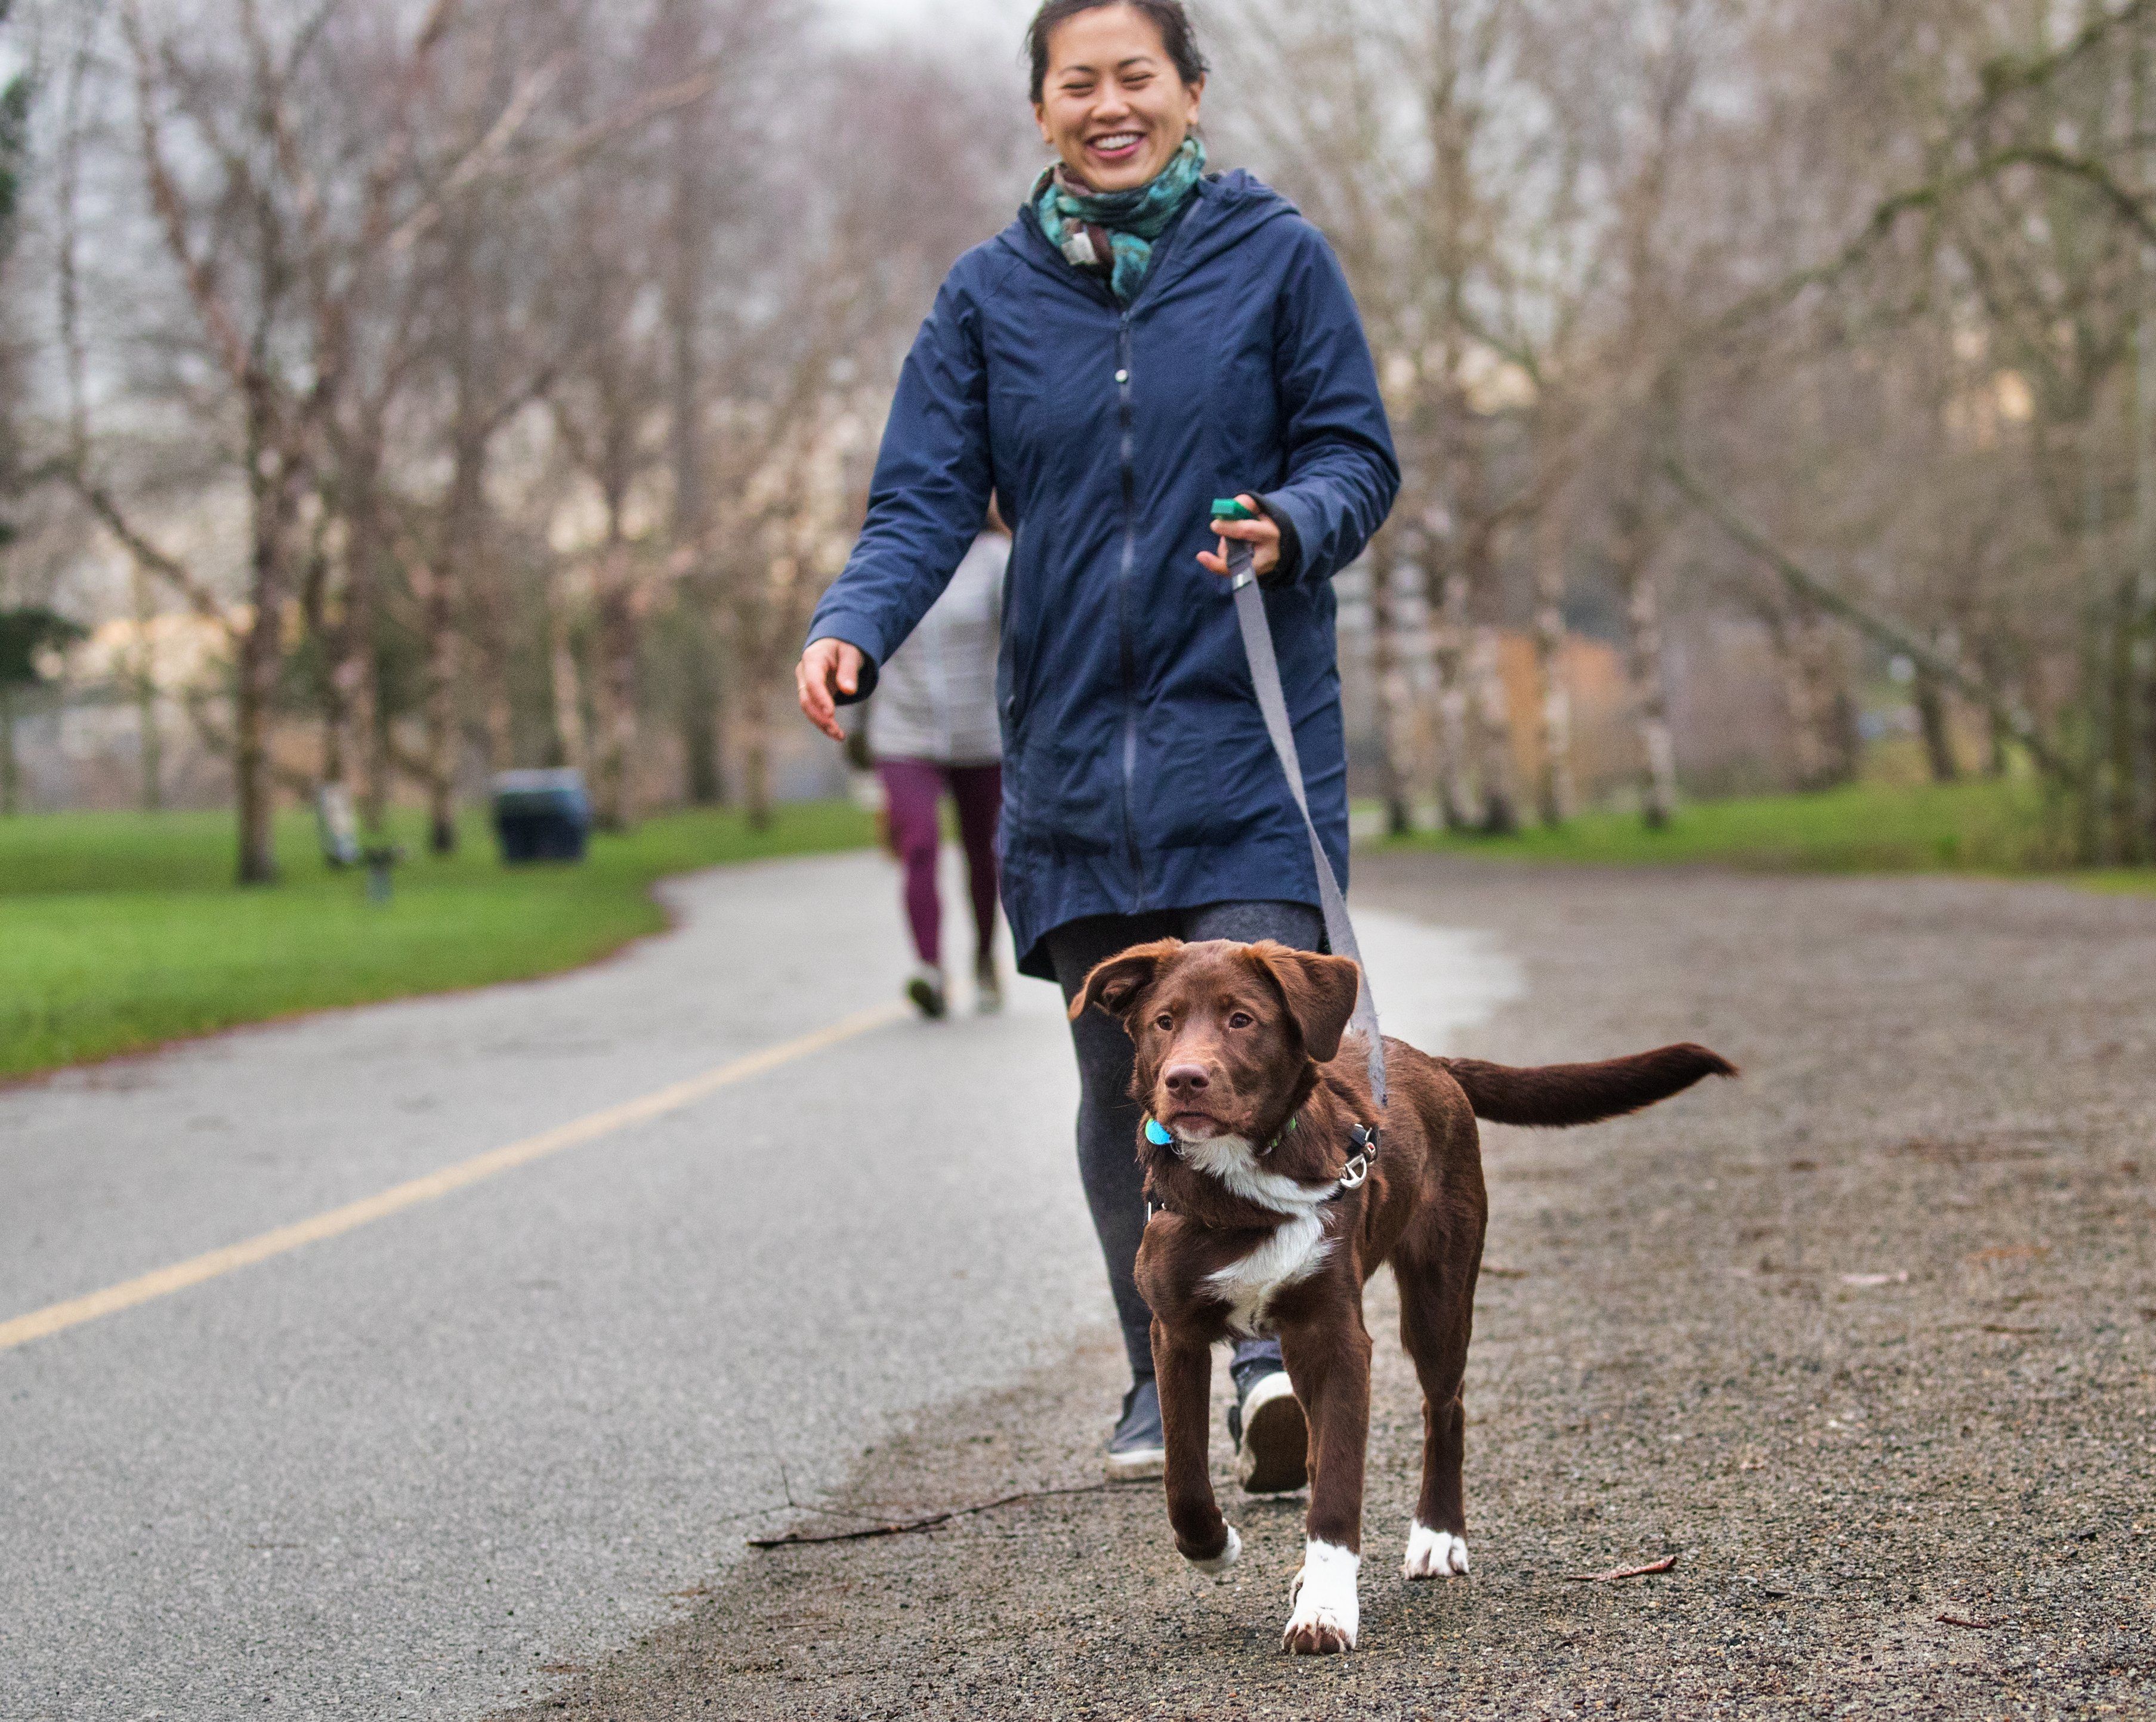 An energetic pet can motivate you to get outside, get moving — and